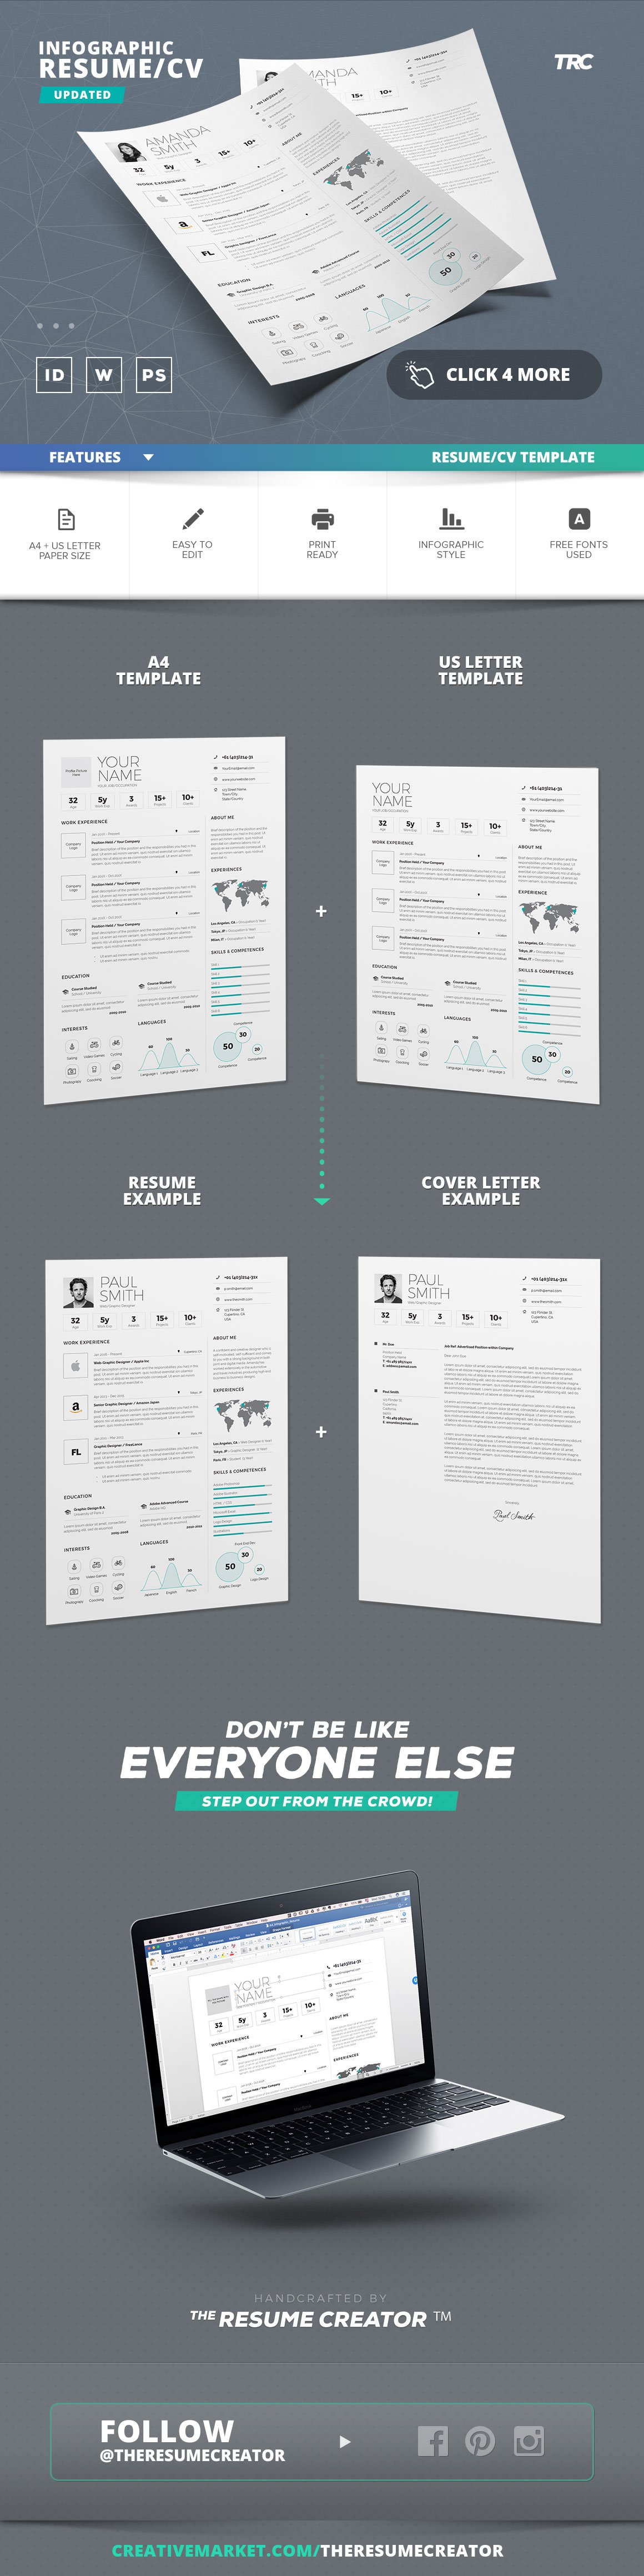 Infographic Resume/Cv Template Vol.6 preview image.